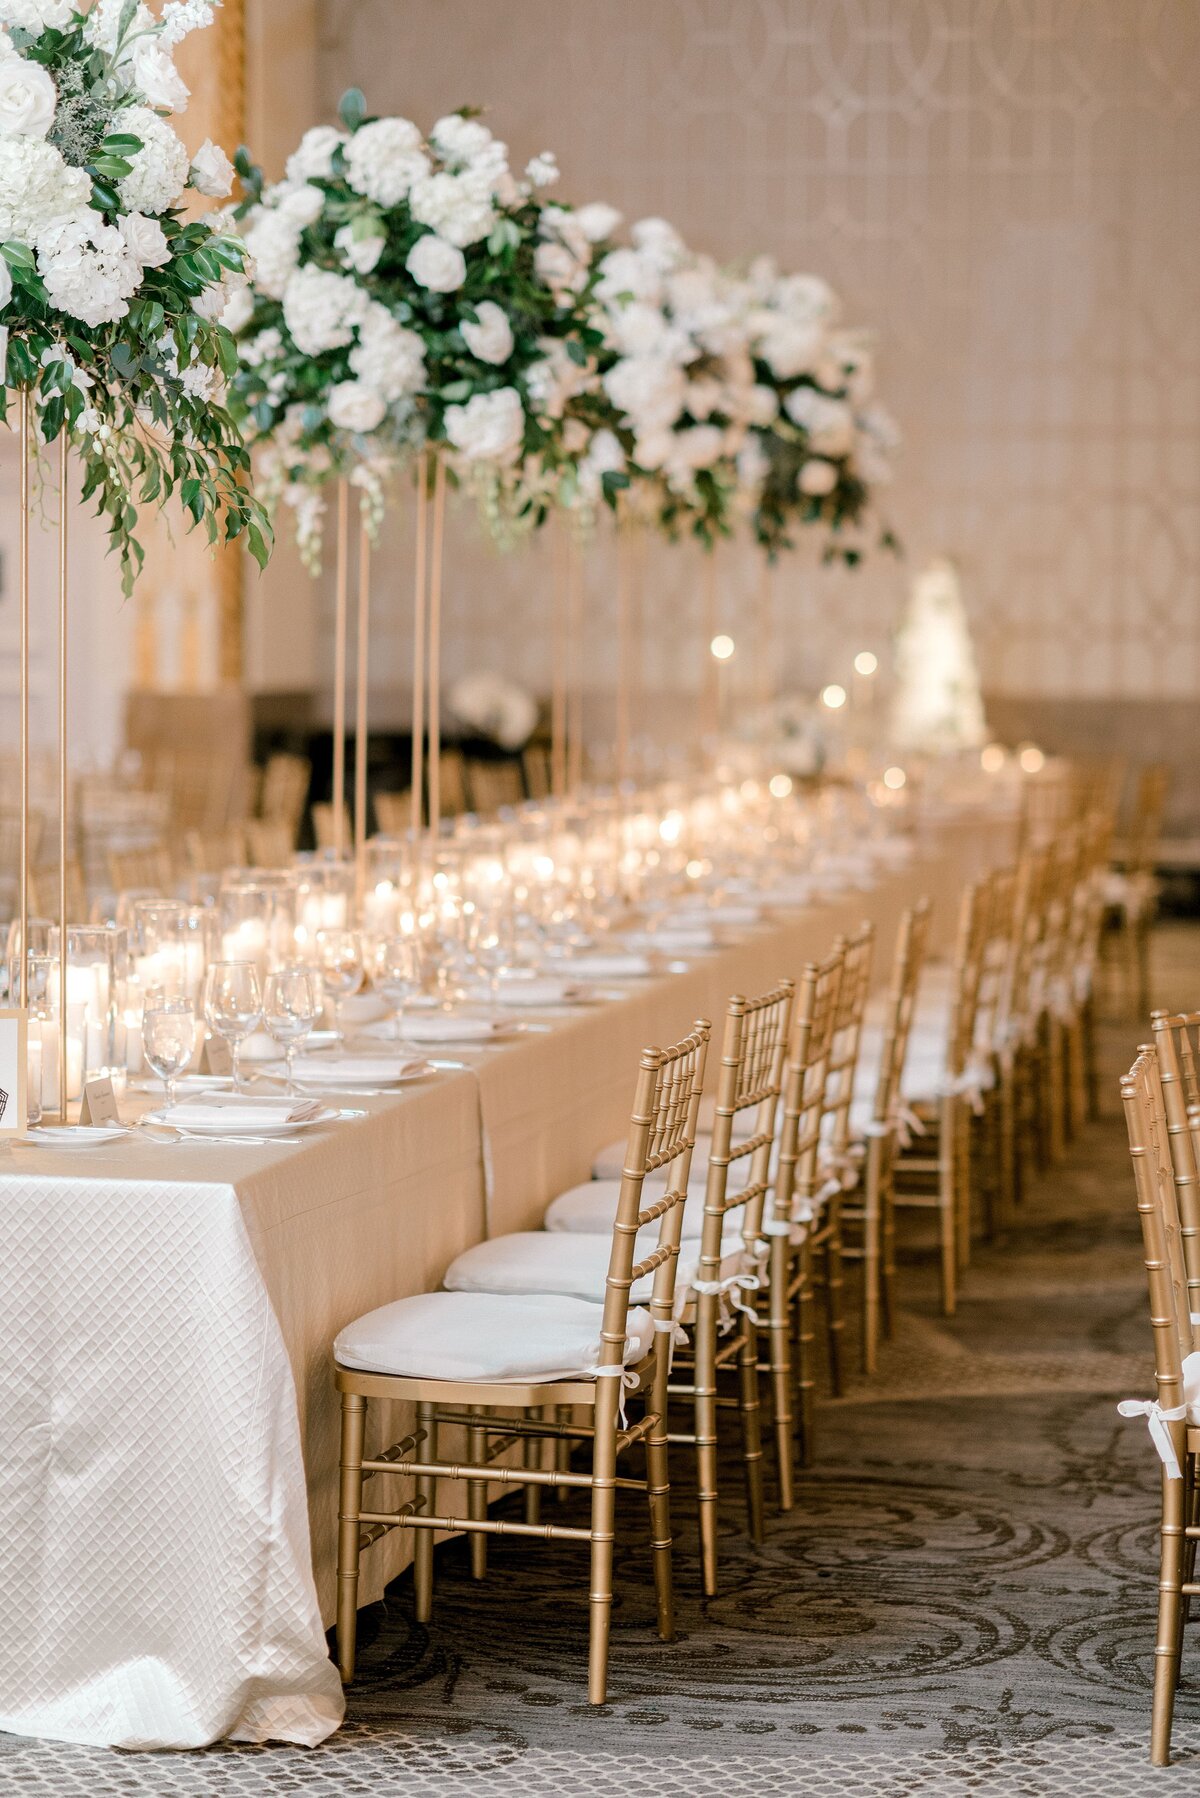 Event-Planning-DC-Washington-Dc-Wedding-Mayflower-Hotel-DC-Photography-DuJour-reception-decor-kings-table-harlow-stands-candles